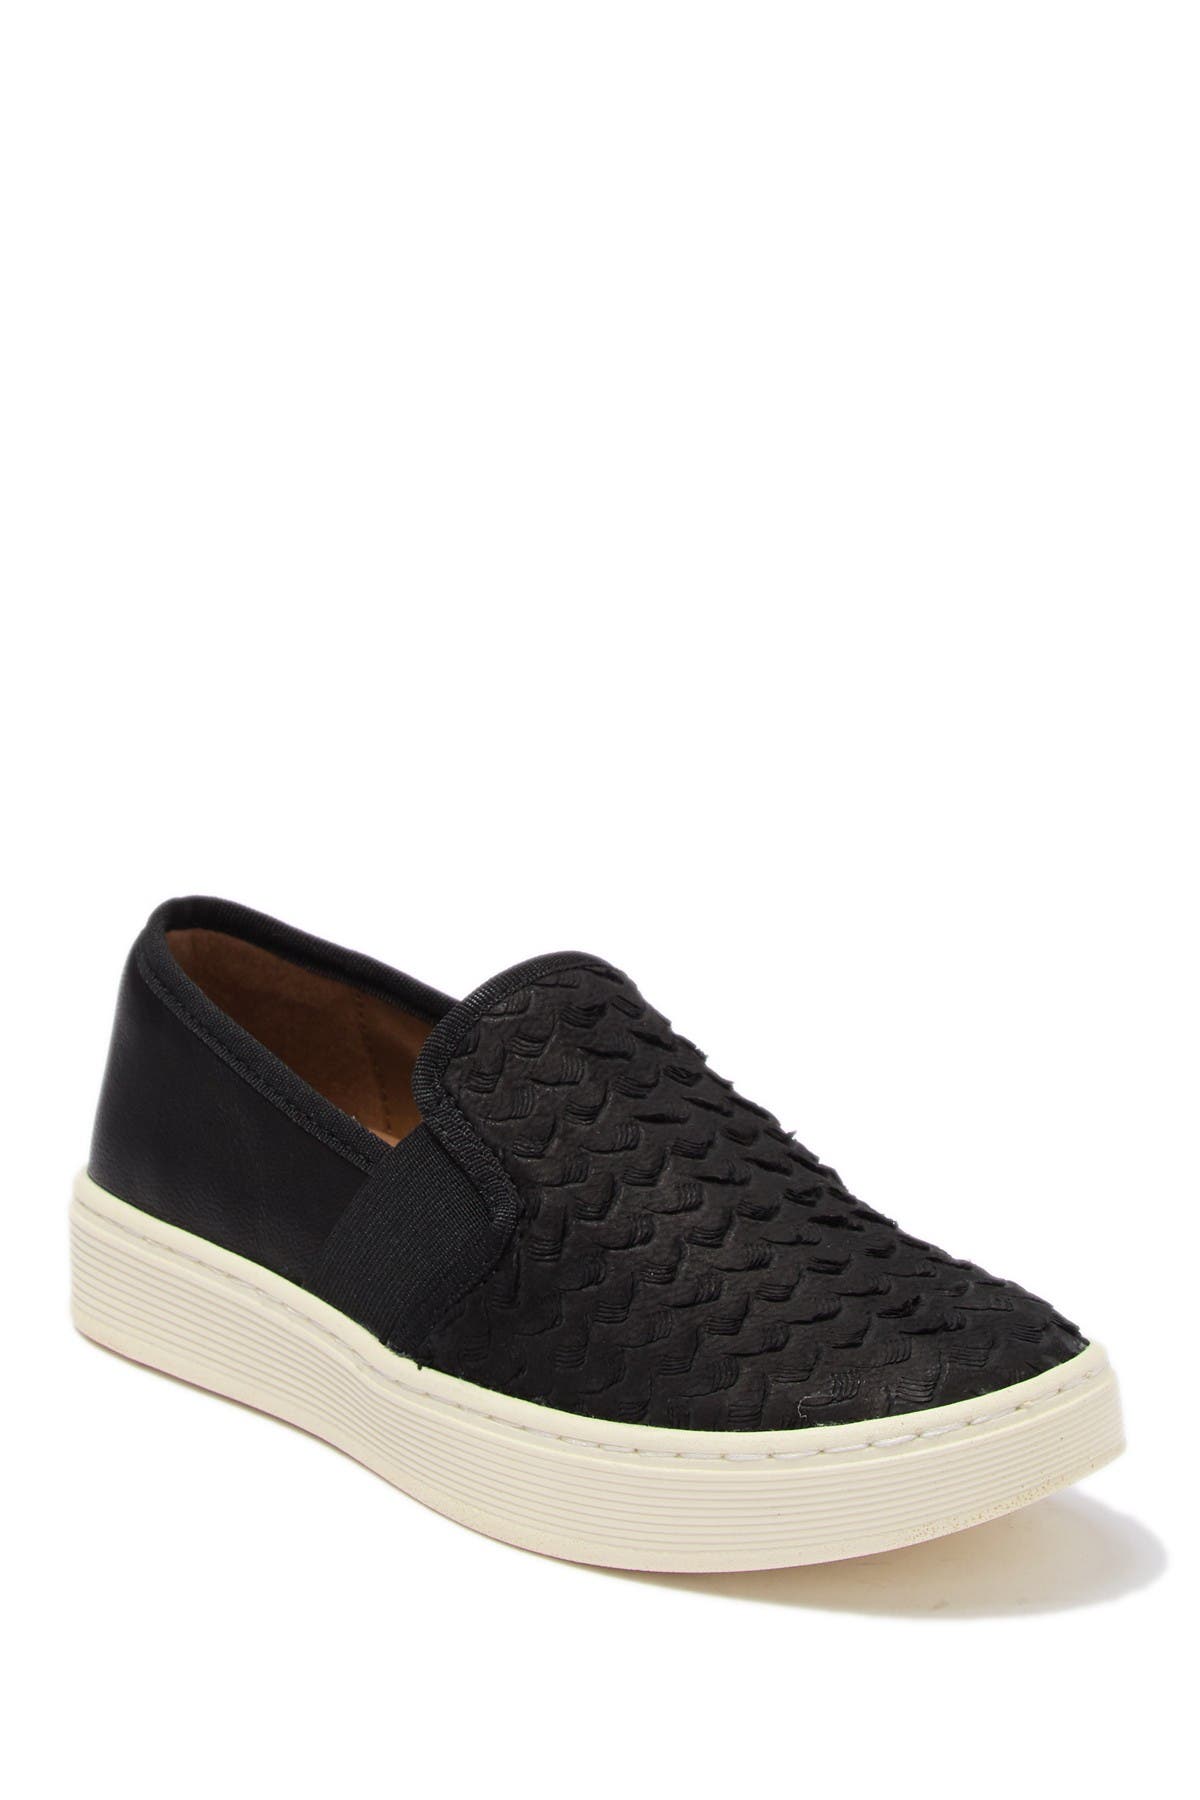 textured slip on shoes